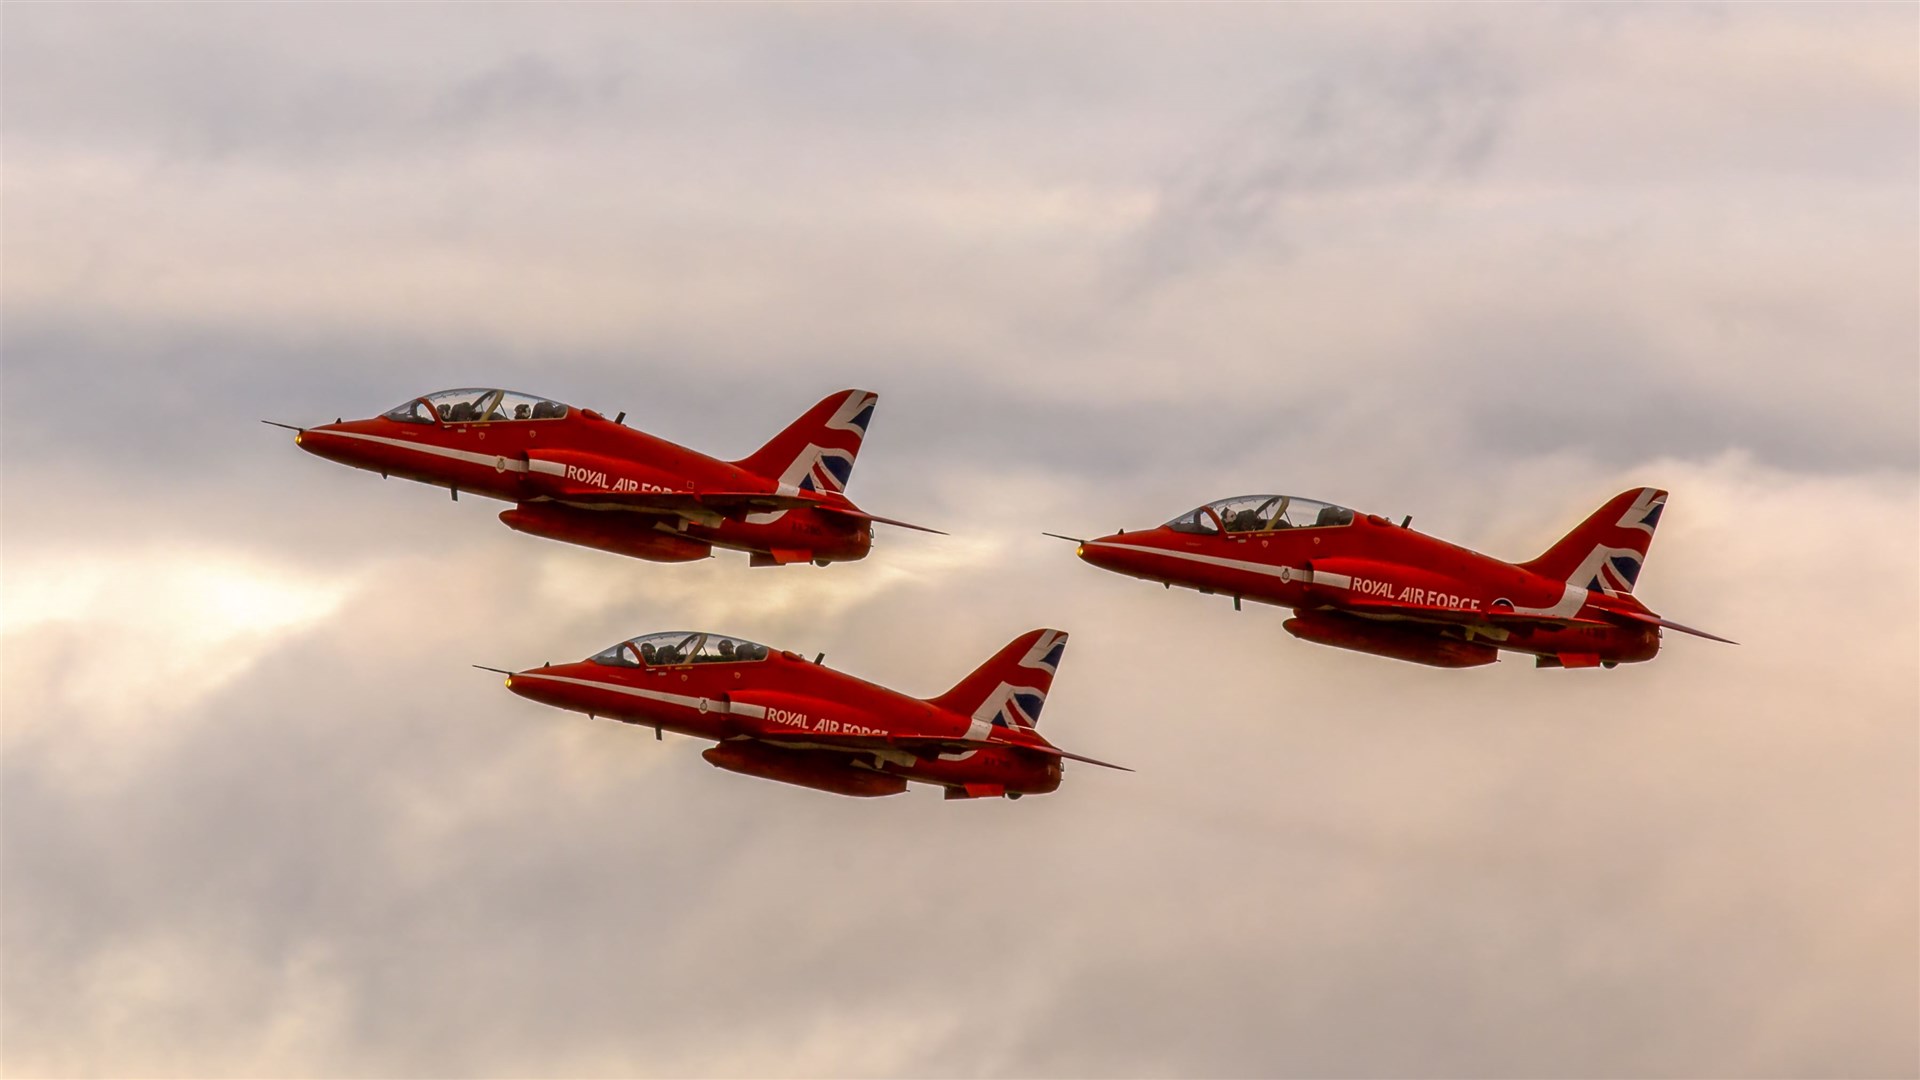 Northern Scot reader Alan Tough submitted this photo of the Red Arrows flying above Moray.